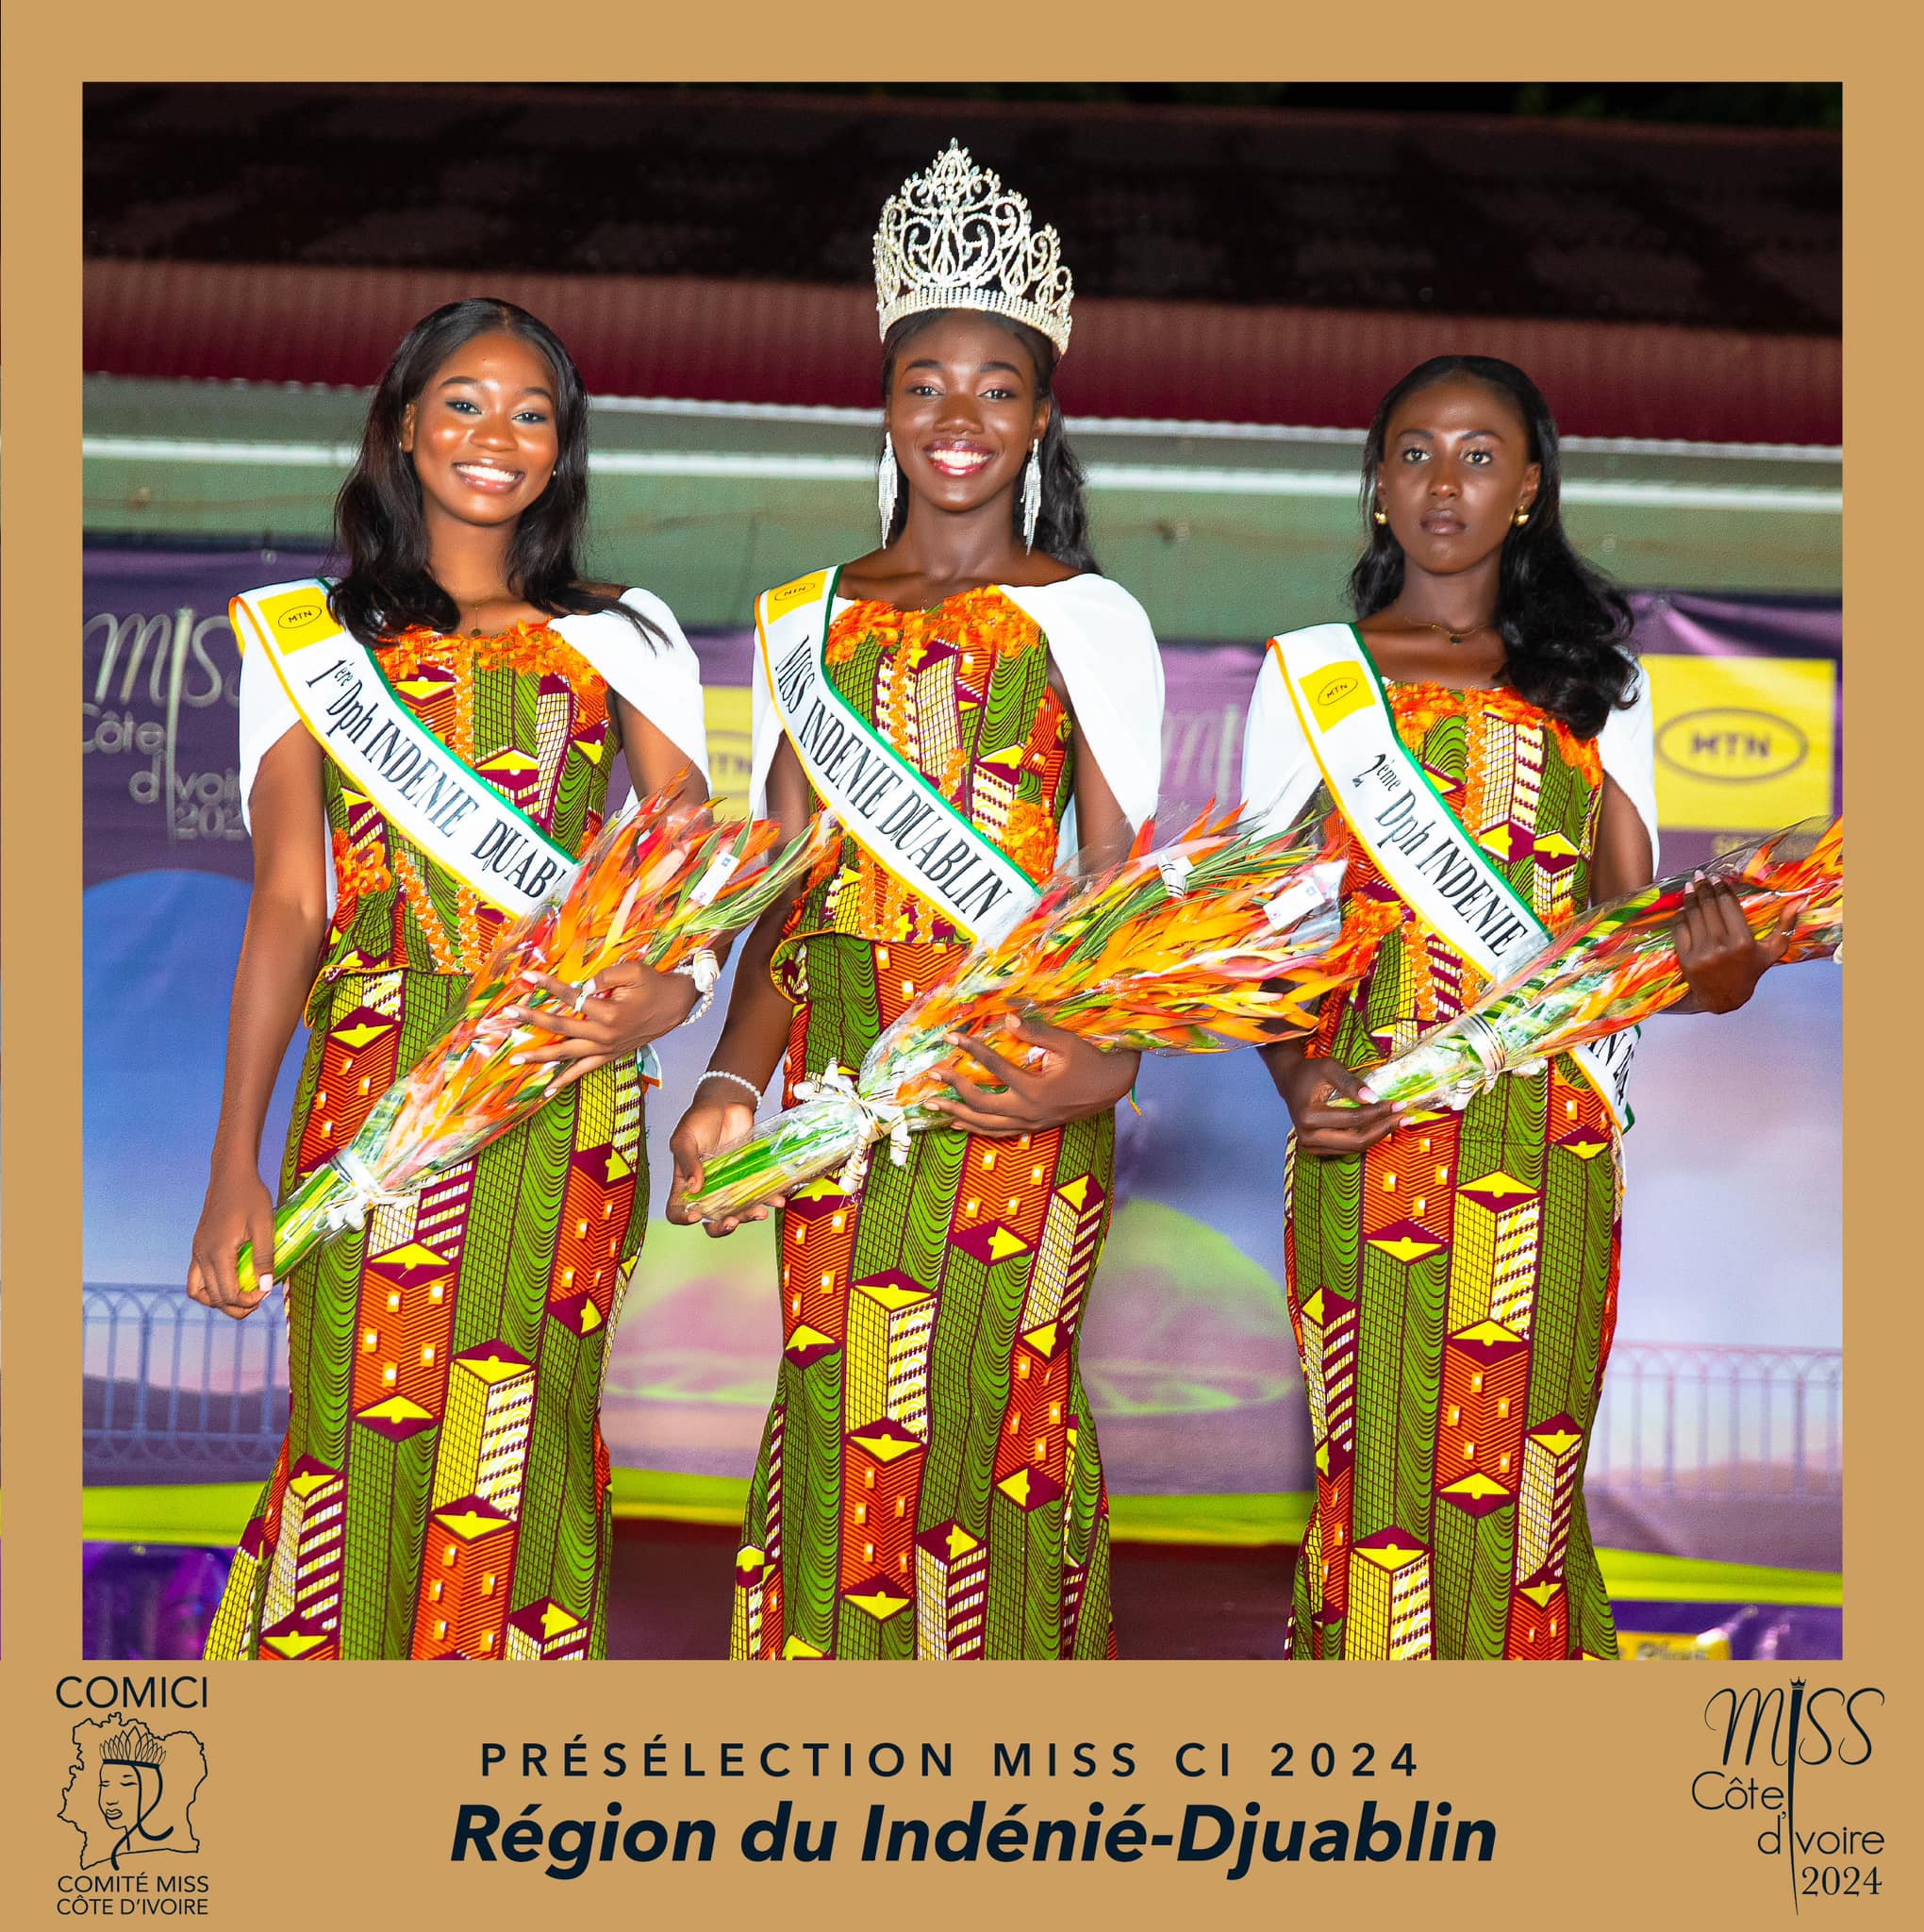 Contestant N°8 MISS N'DRAMAN MARIE-PIERRE -21 years old - 1 m 81 | 1ST YEAR MASTER OF COMMUNICATION , obtained the highest score from the jury and became Miss ABENGOUROU 2024- DISTRICT INDENIE-DJUABLIN.